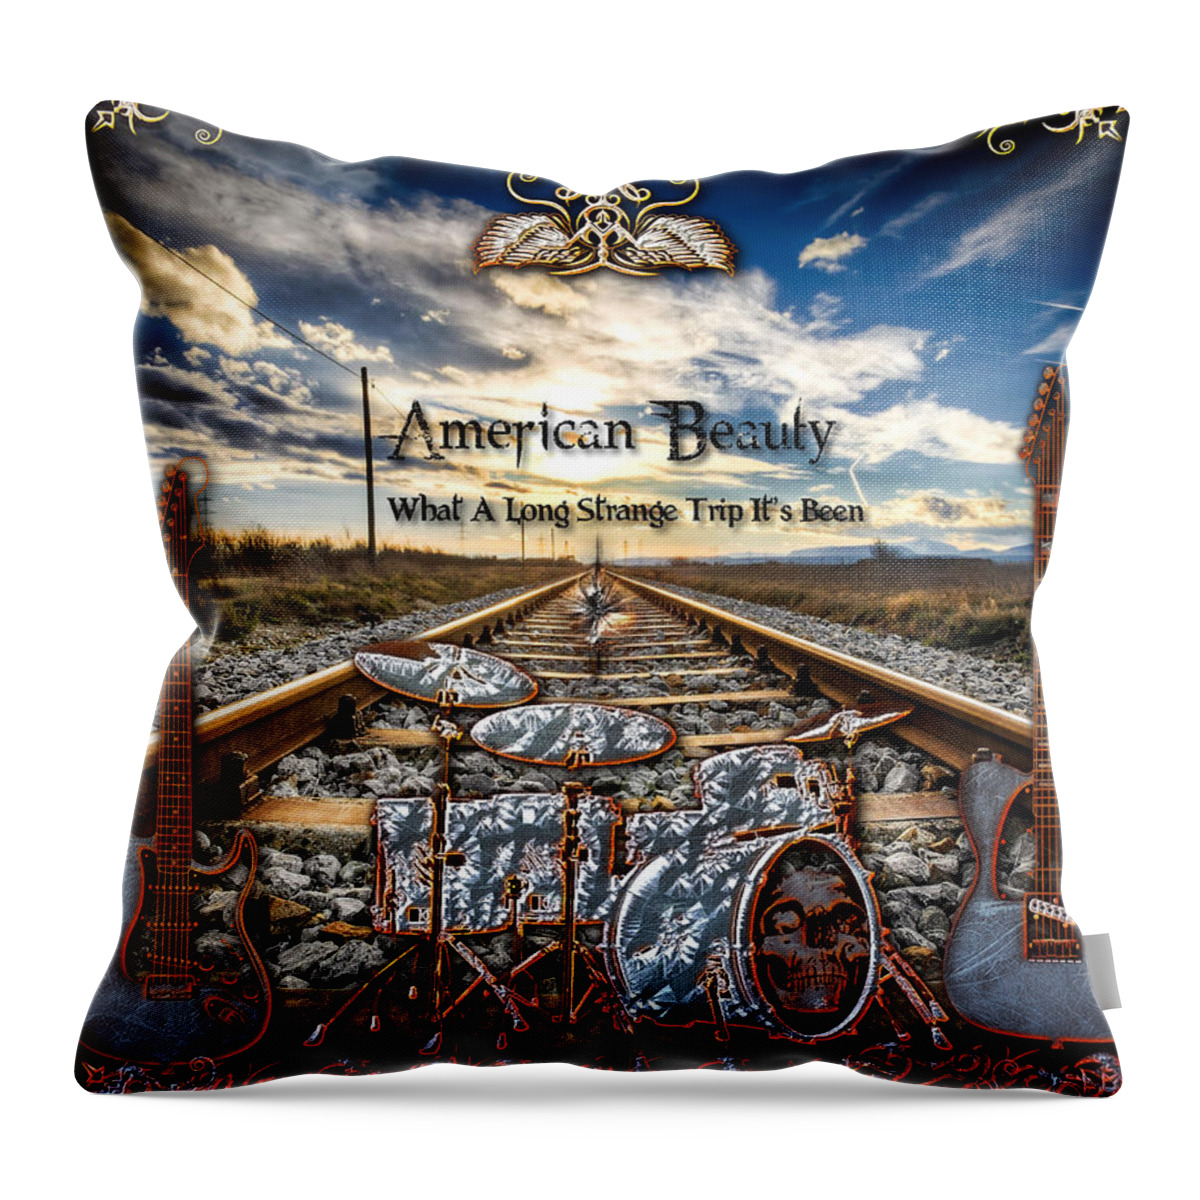 American Beauty Throw Pillow featuring the digital art American Beauty by Michael Damiani